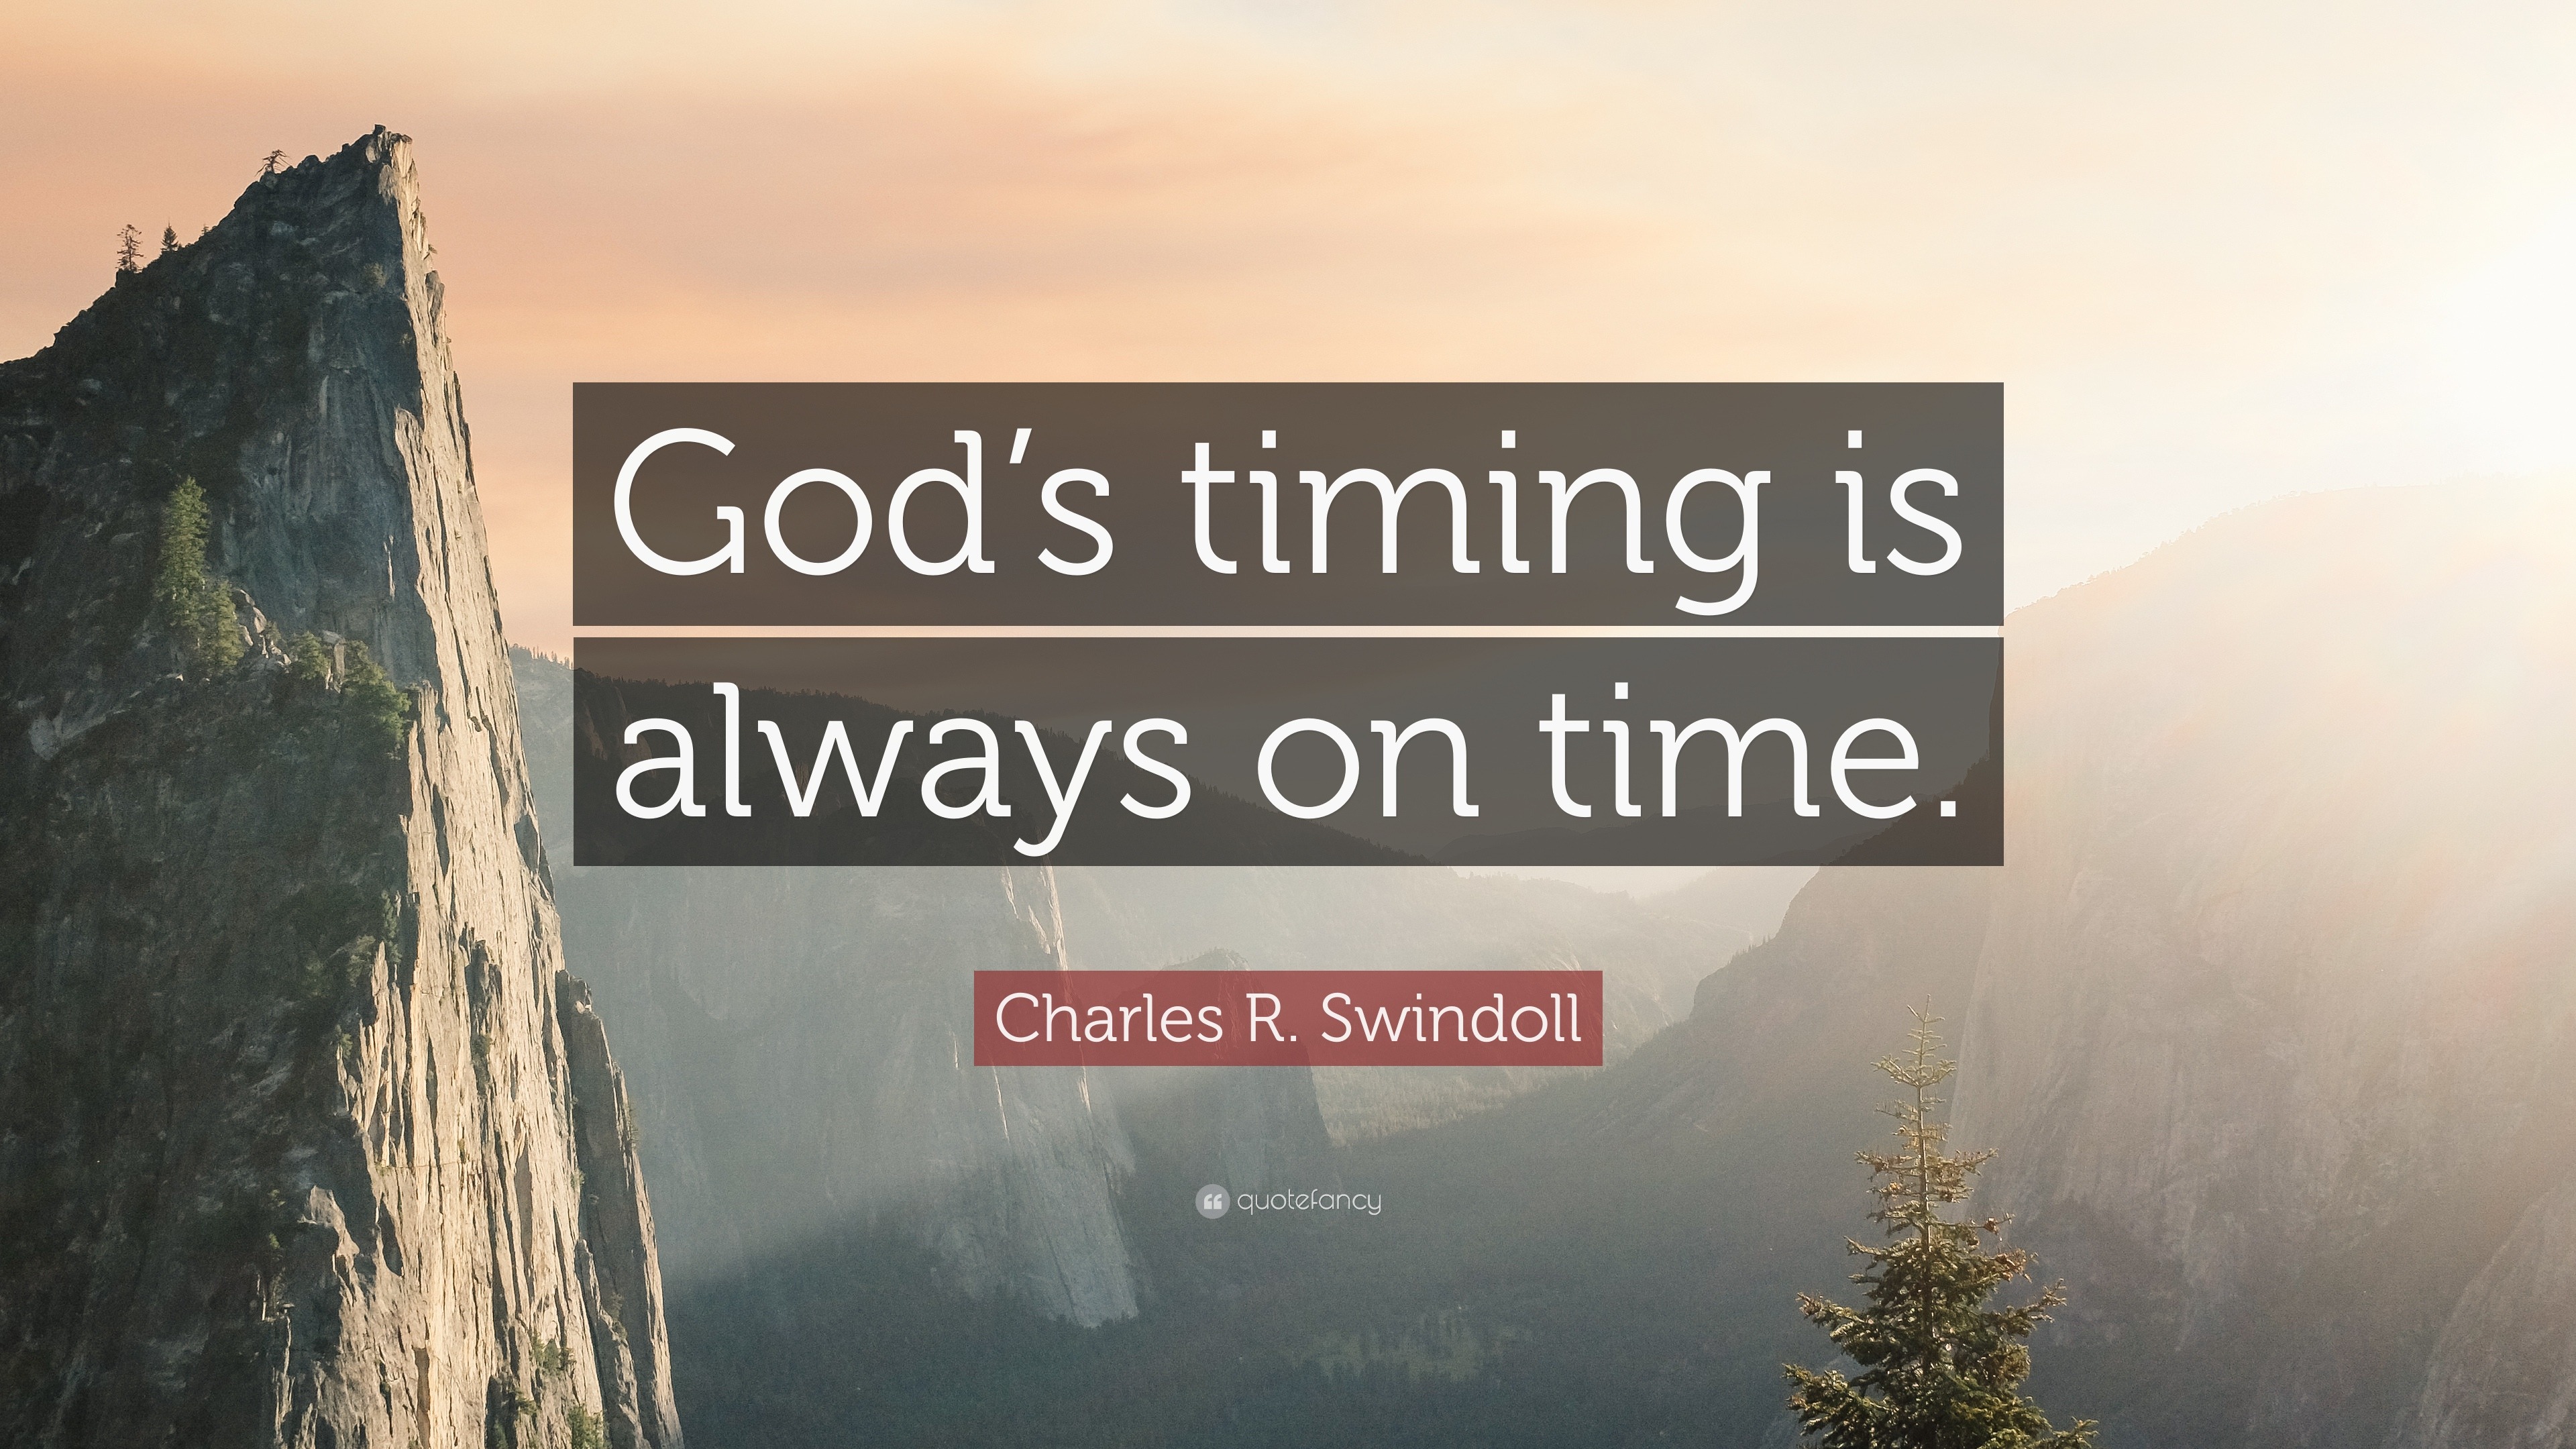 Charles R. Swindoll Quote: “God’s timing is always on time.” (7